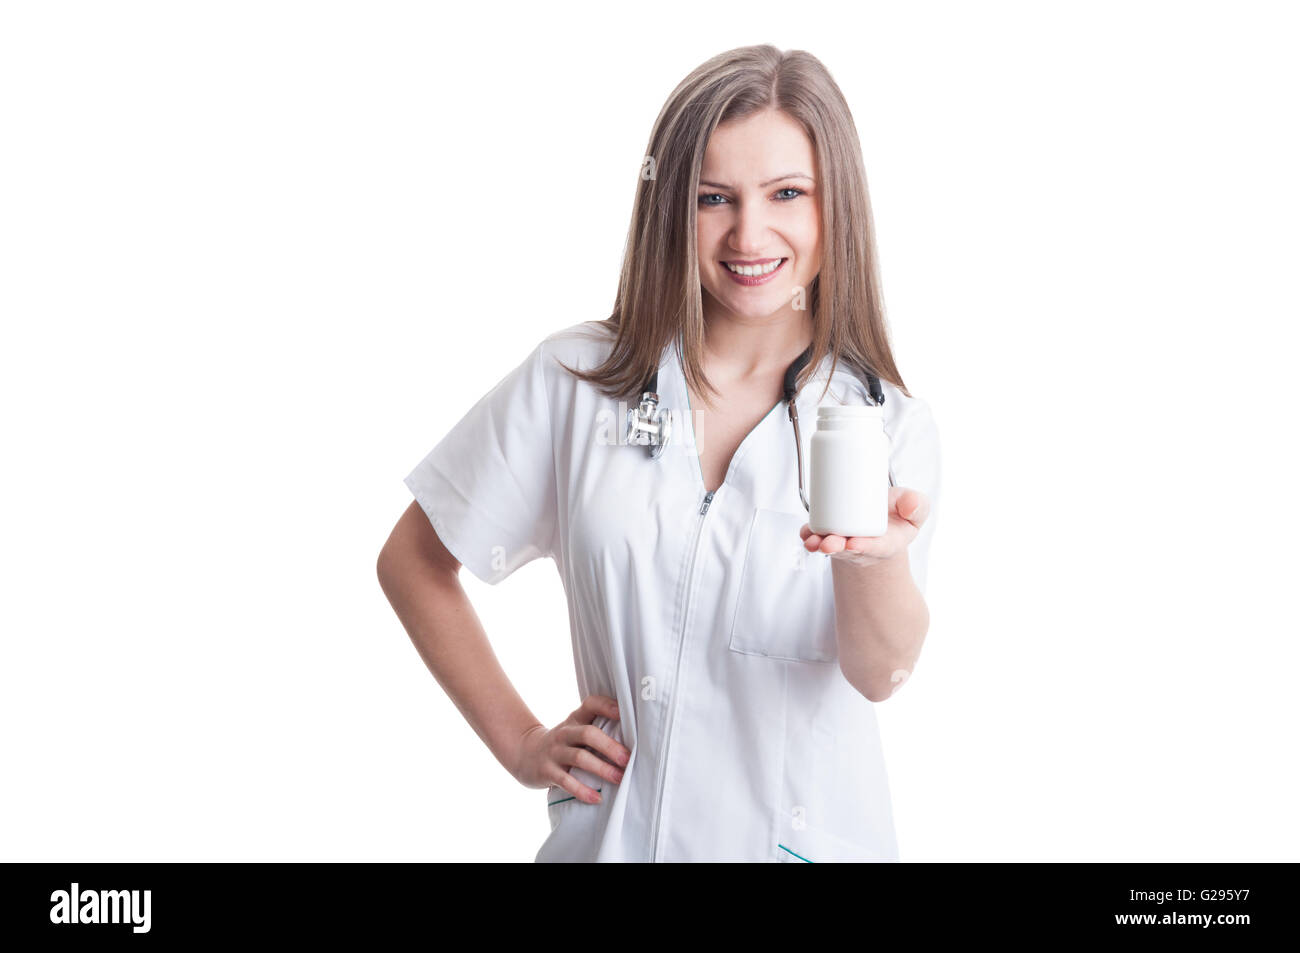 Young female doctor presenting a white unlabeled bottle or recipient of pills Stock Photo